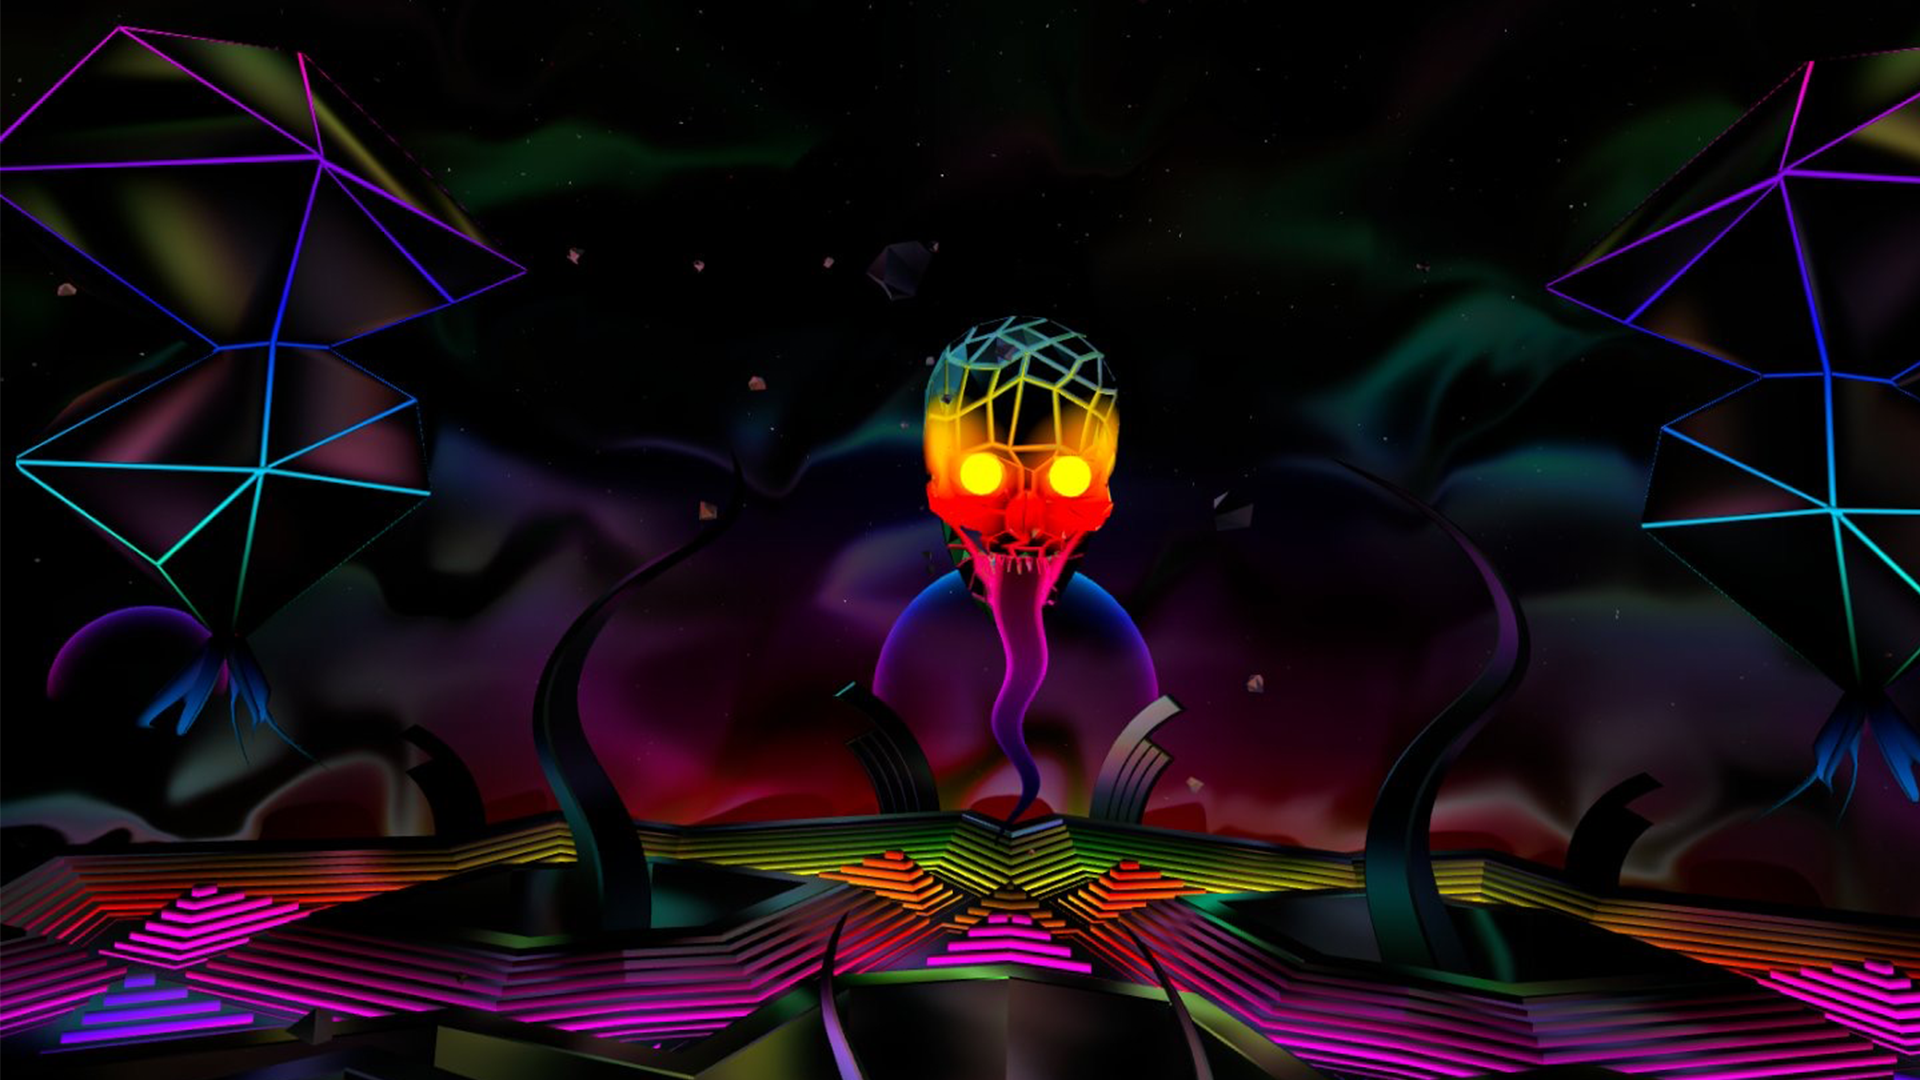 Thrasher screenshot shows an ominous skull with psychedelic colors in the distance